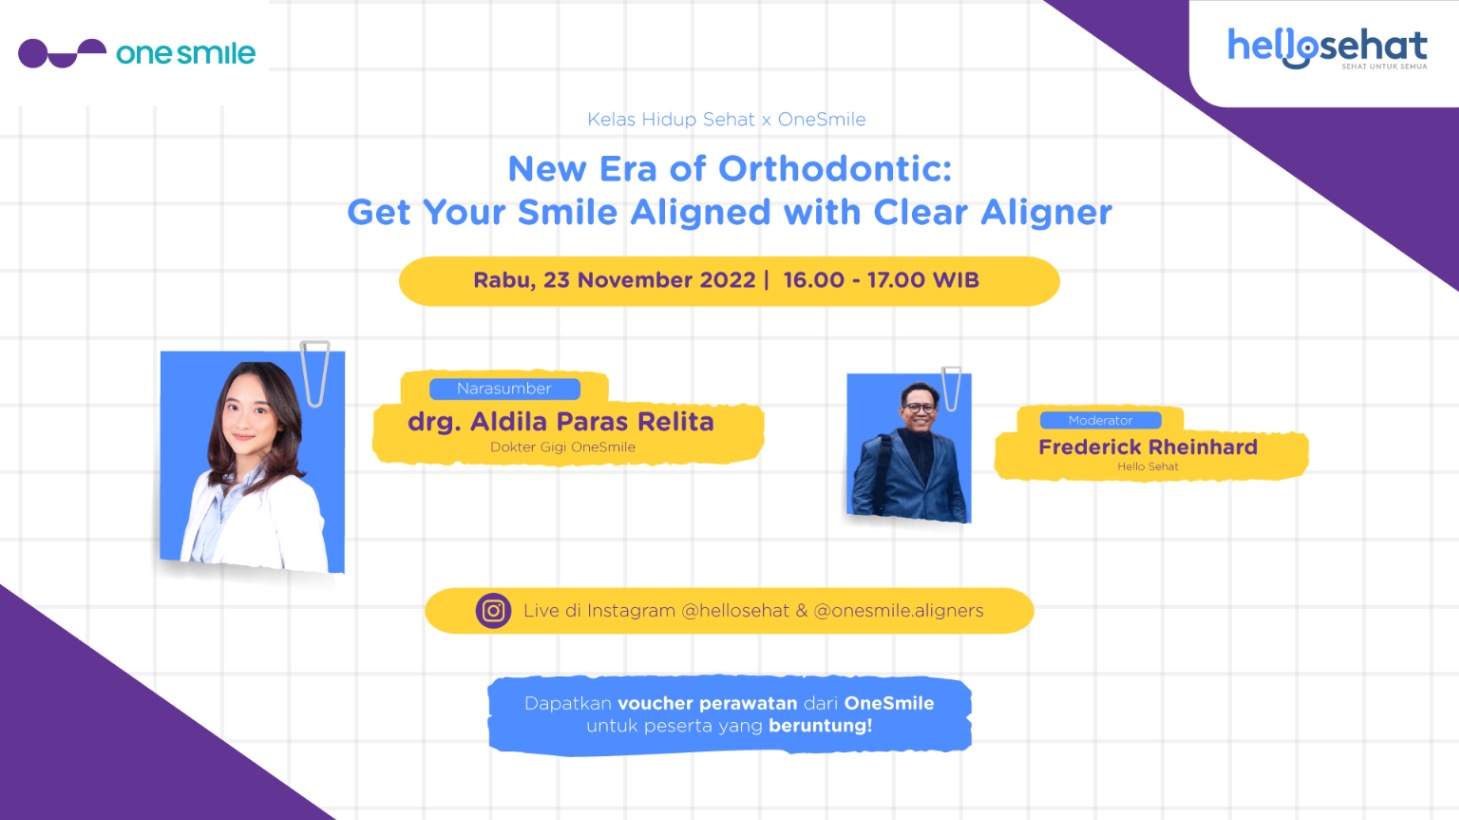 IG LIVE! New Era of Orthodontic: Get Your Smile Aligned with Clear Aligner